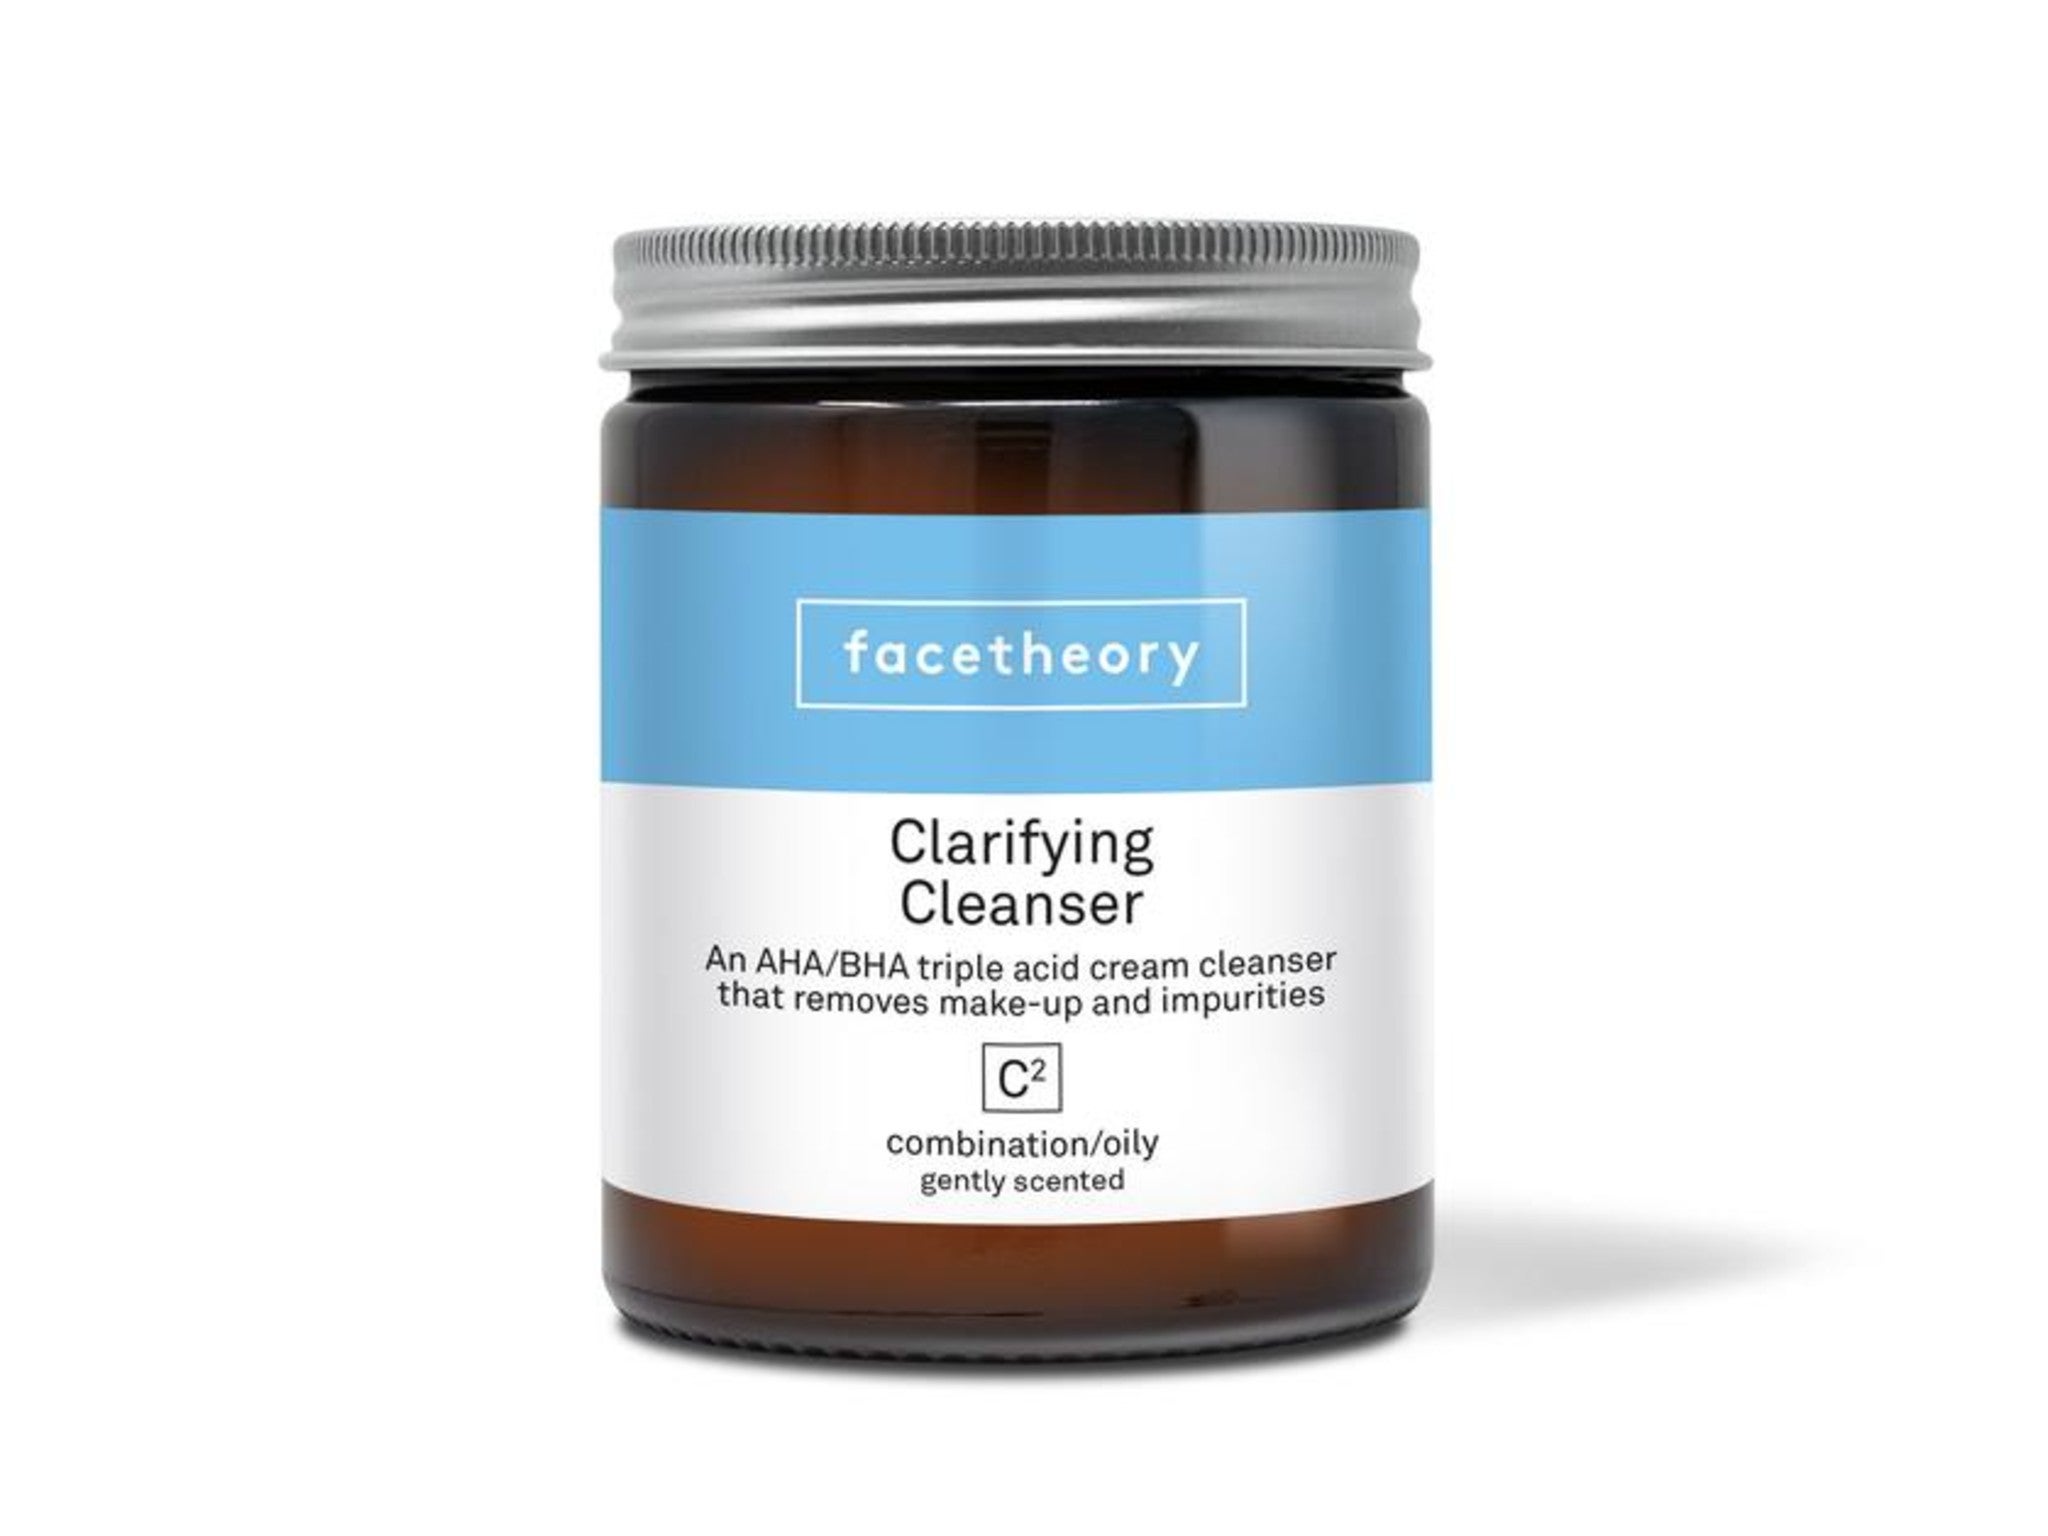 Facetheory clarifying cleanser C2 indybest.jpeg